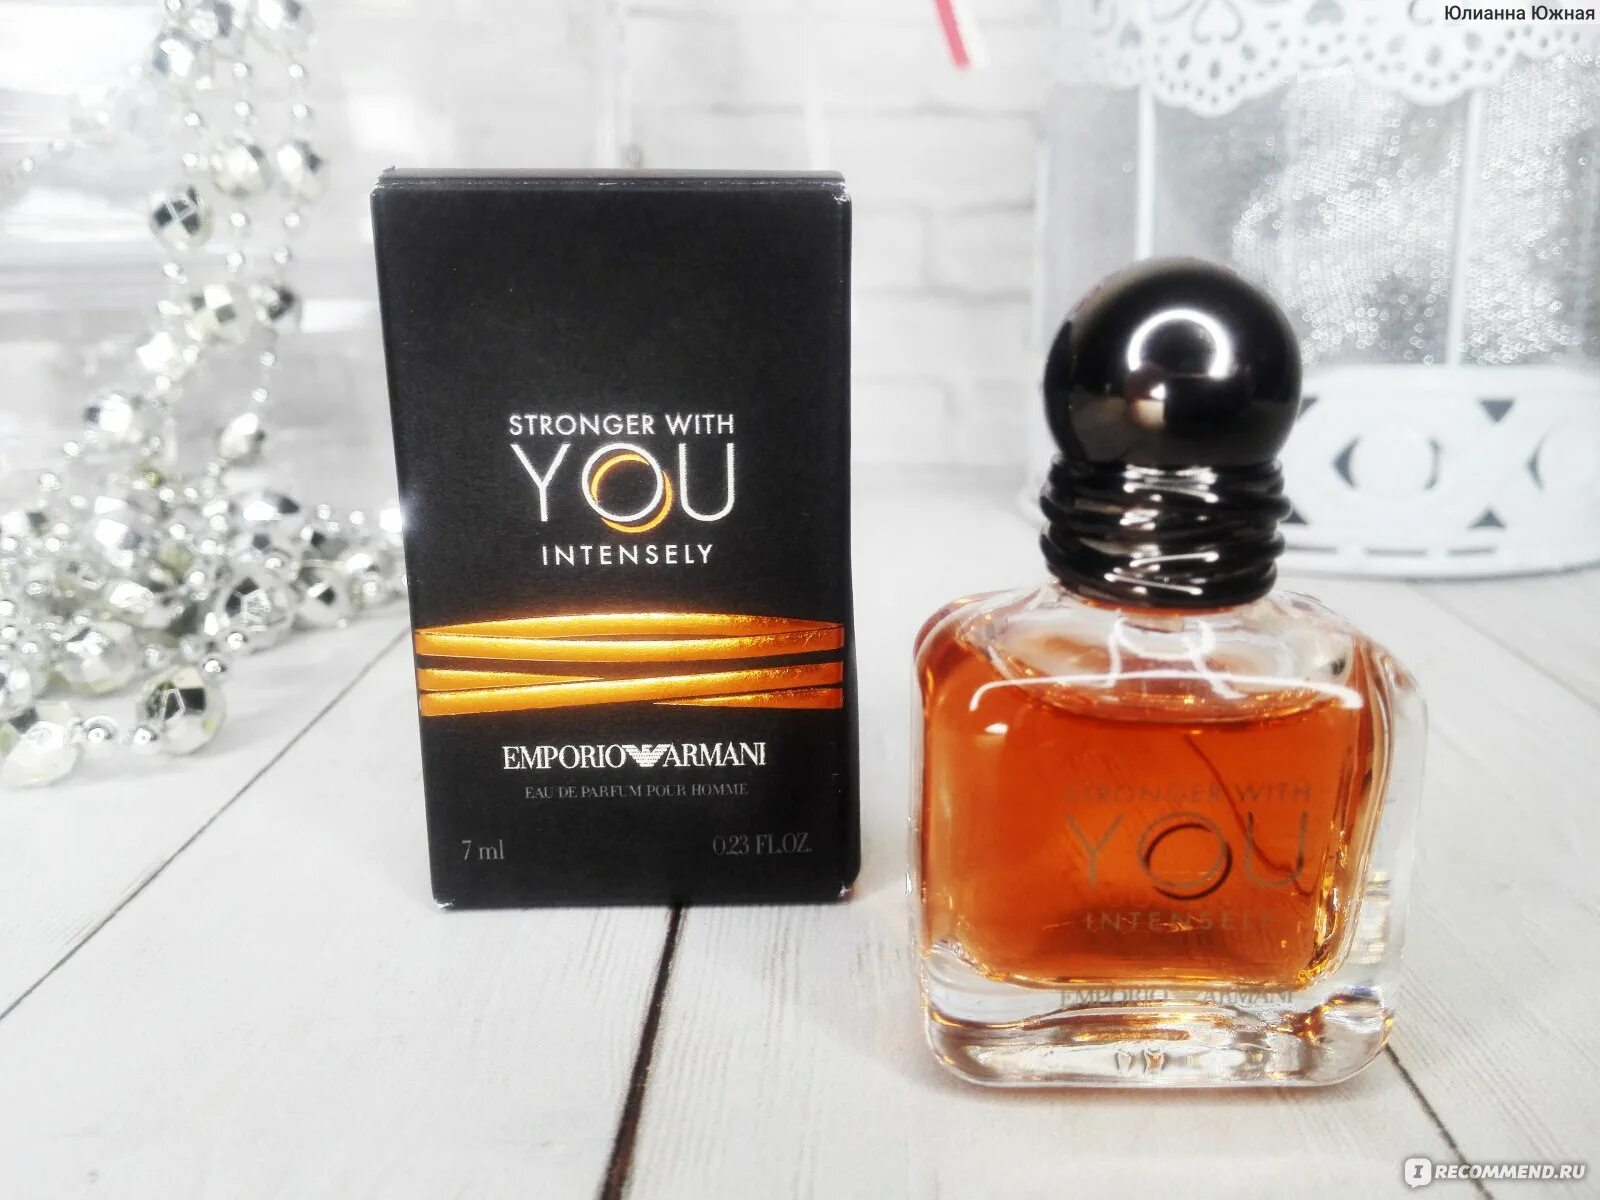 Stronger with you only. Парфюмерная вода Giorgio Armani Emporio Armani stronger with you intensely 100 ml. Giorgio Armani stronger with you absolutely 100 ml. Giorgio Armani Emporio stronger with you absolutely 15 мл. Emporio Armani stronger with you 30мл.